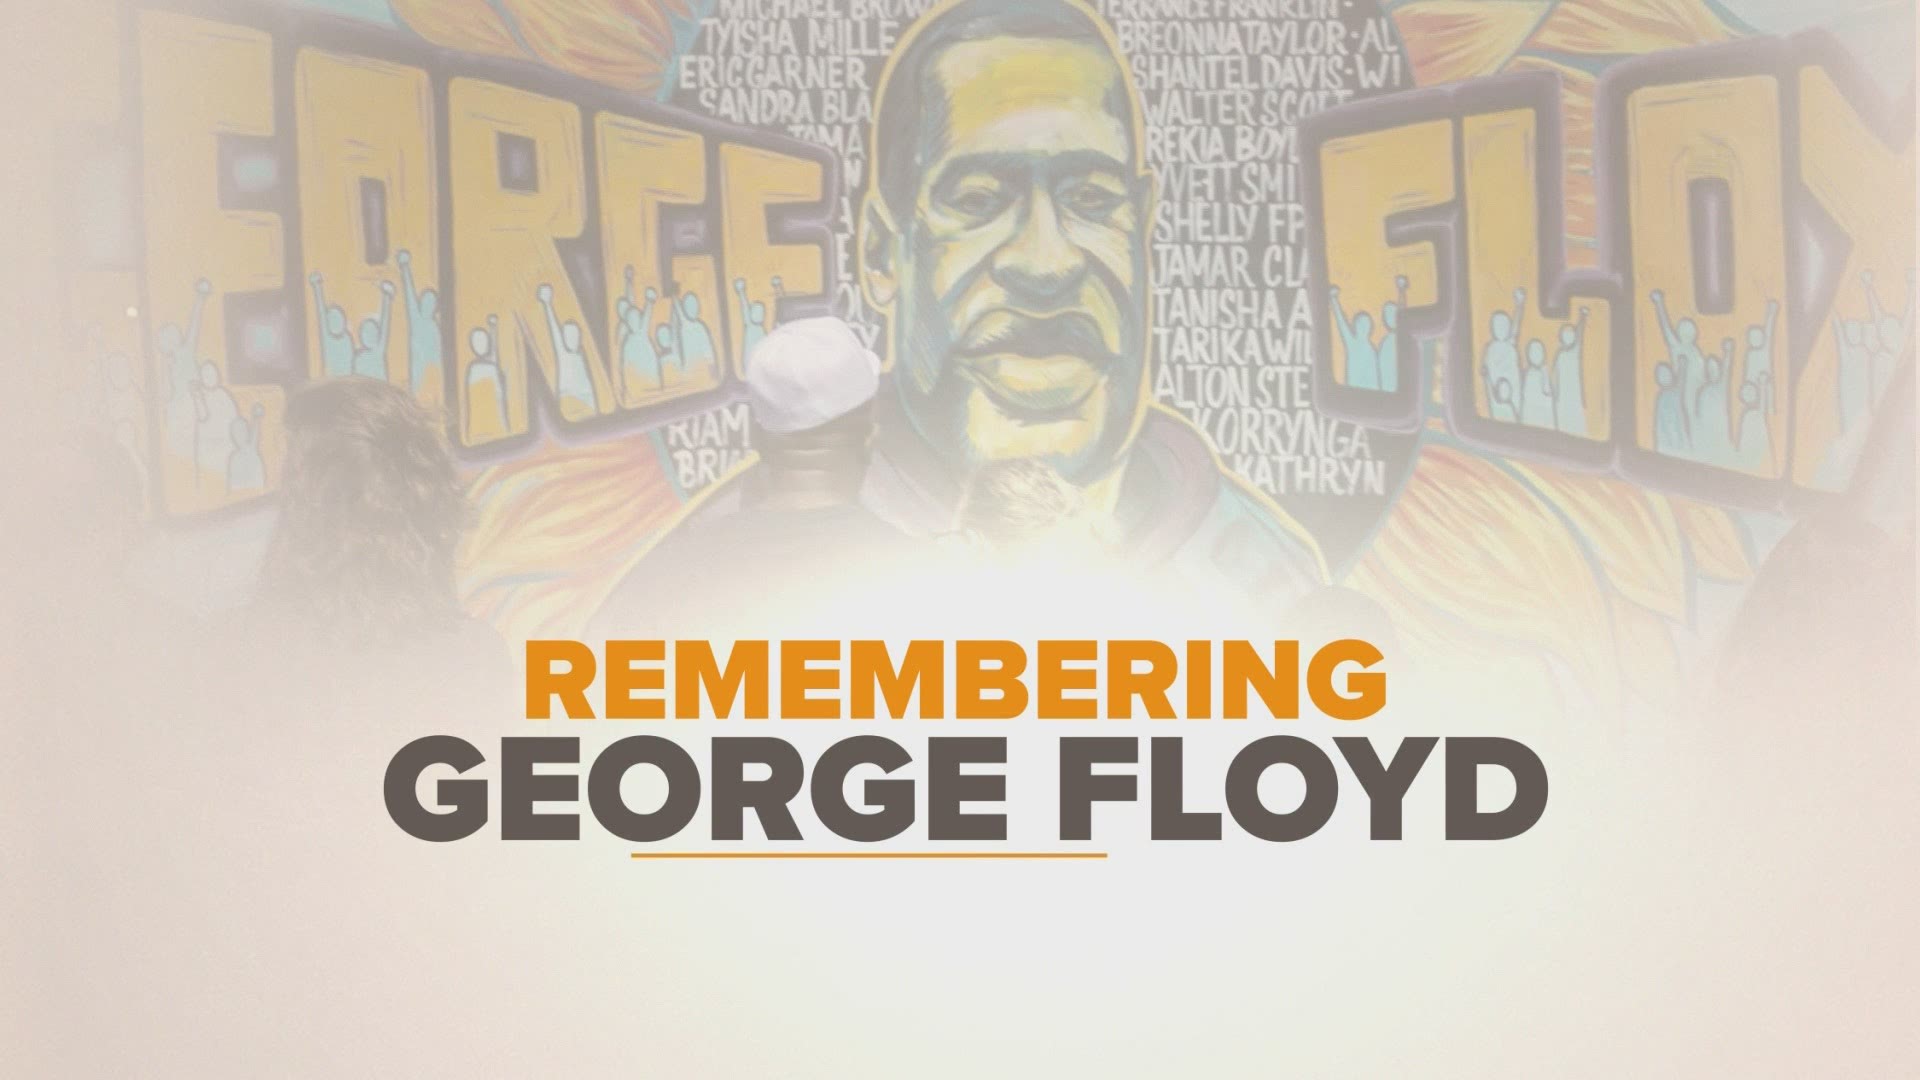 One year after the death of George Floyd, people are still working to achieve police reform and reflecting on his memory.